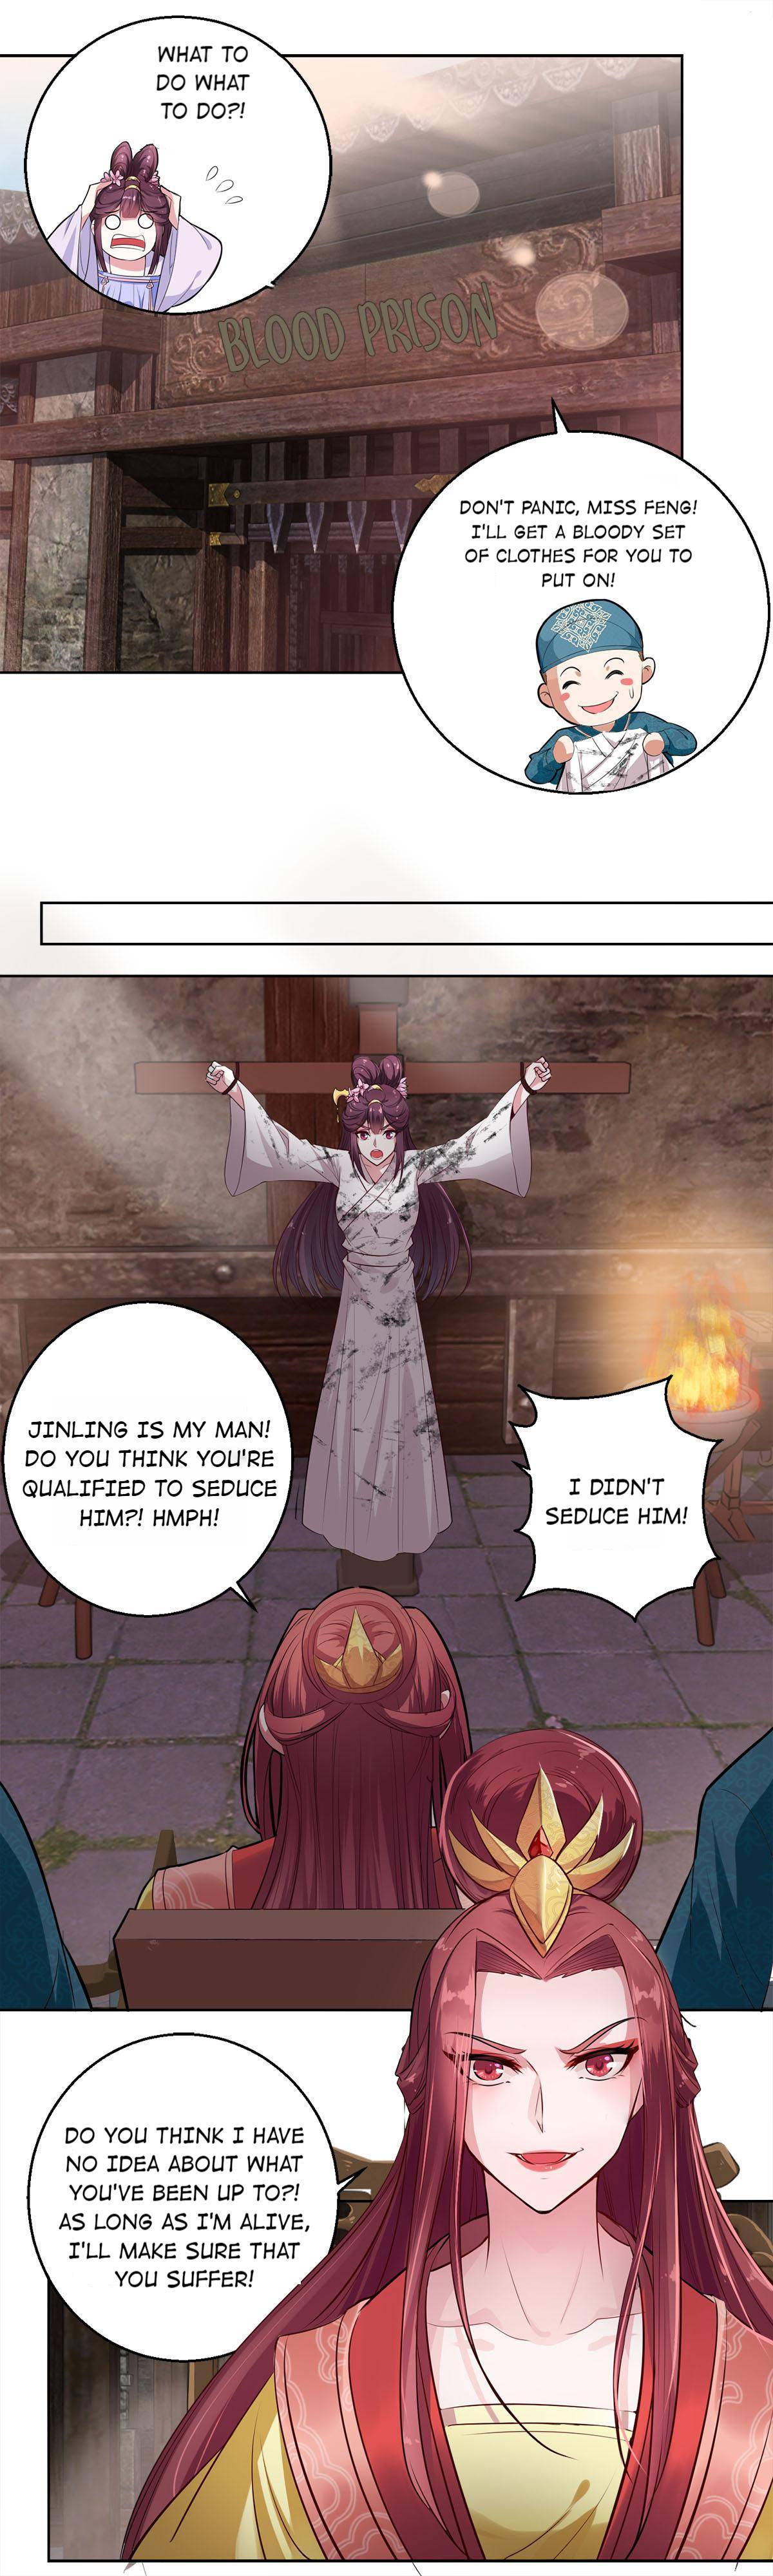 Rebel Princess: The Divine Doctor Outcast Chapter 30 - Page 1